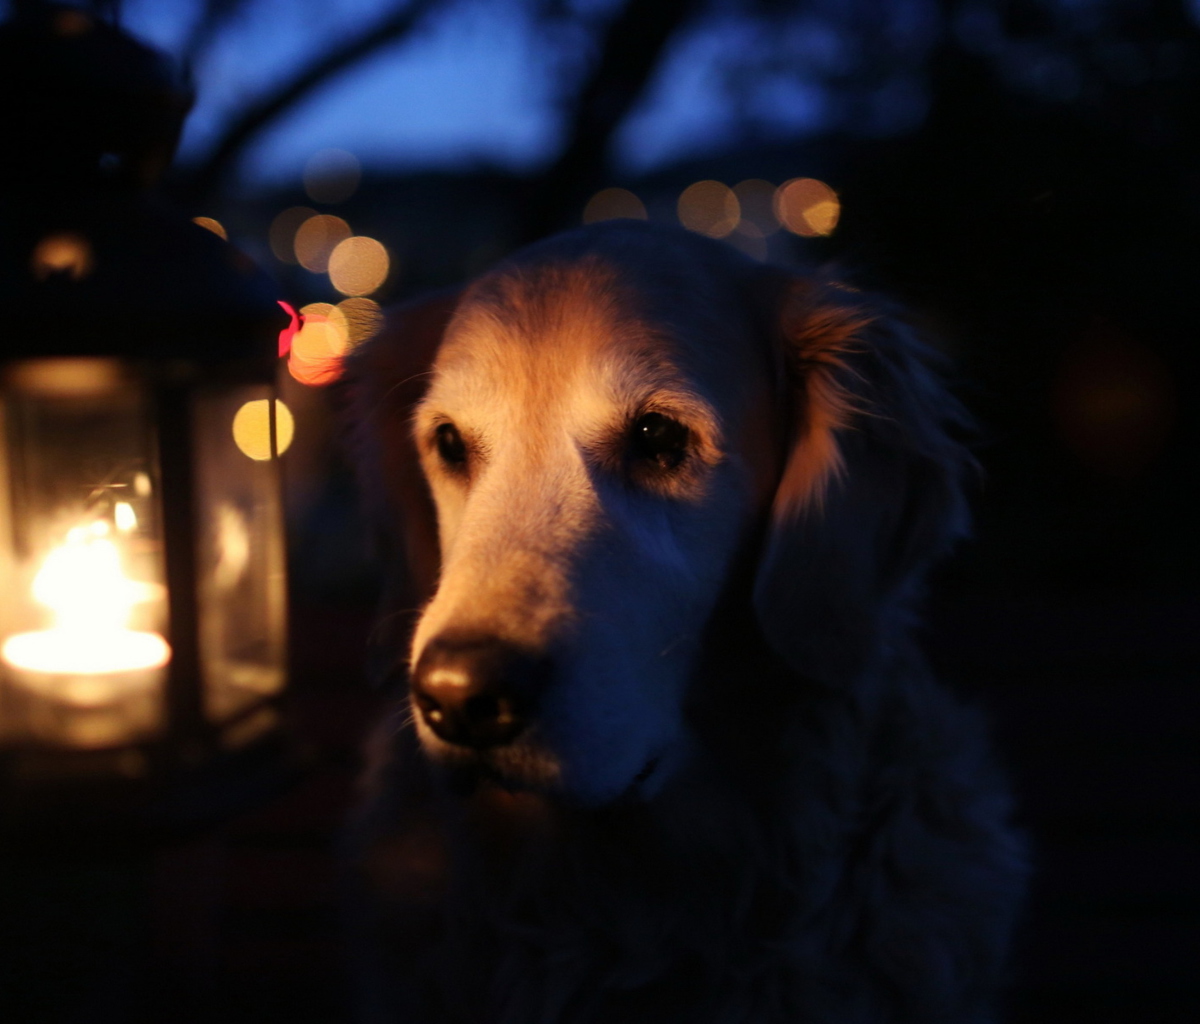 Das Ginger Dog In Candle Light Wallpaper 1200x1024